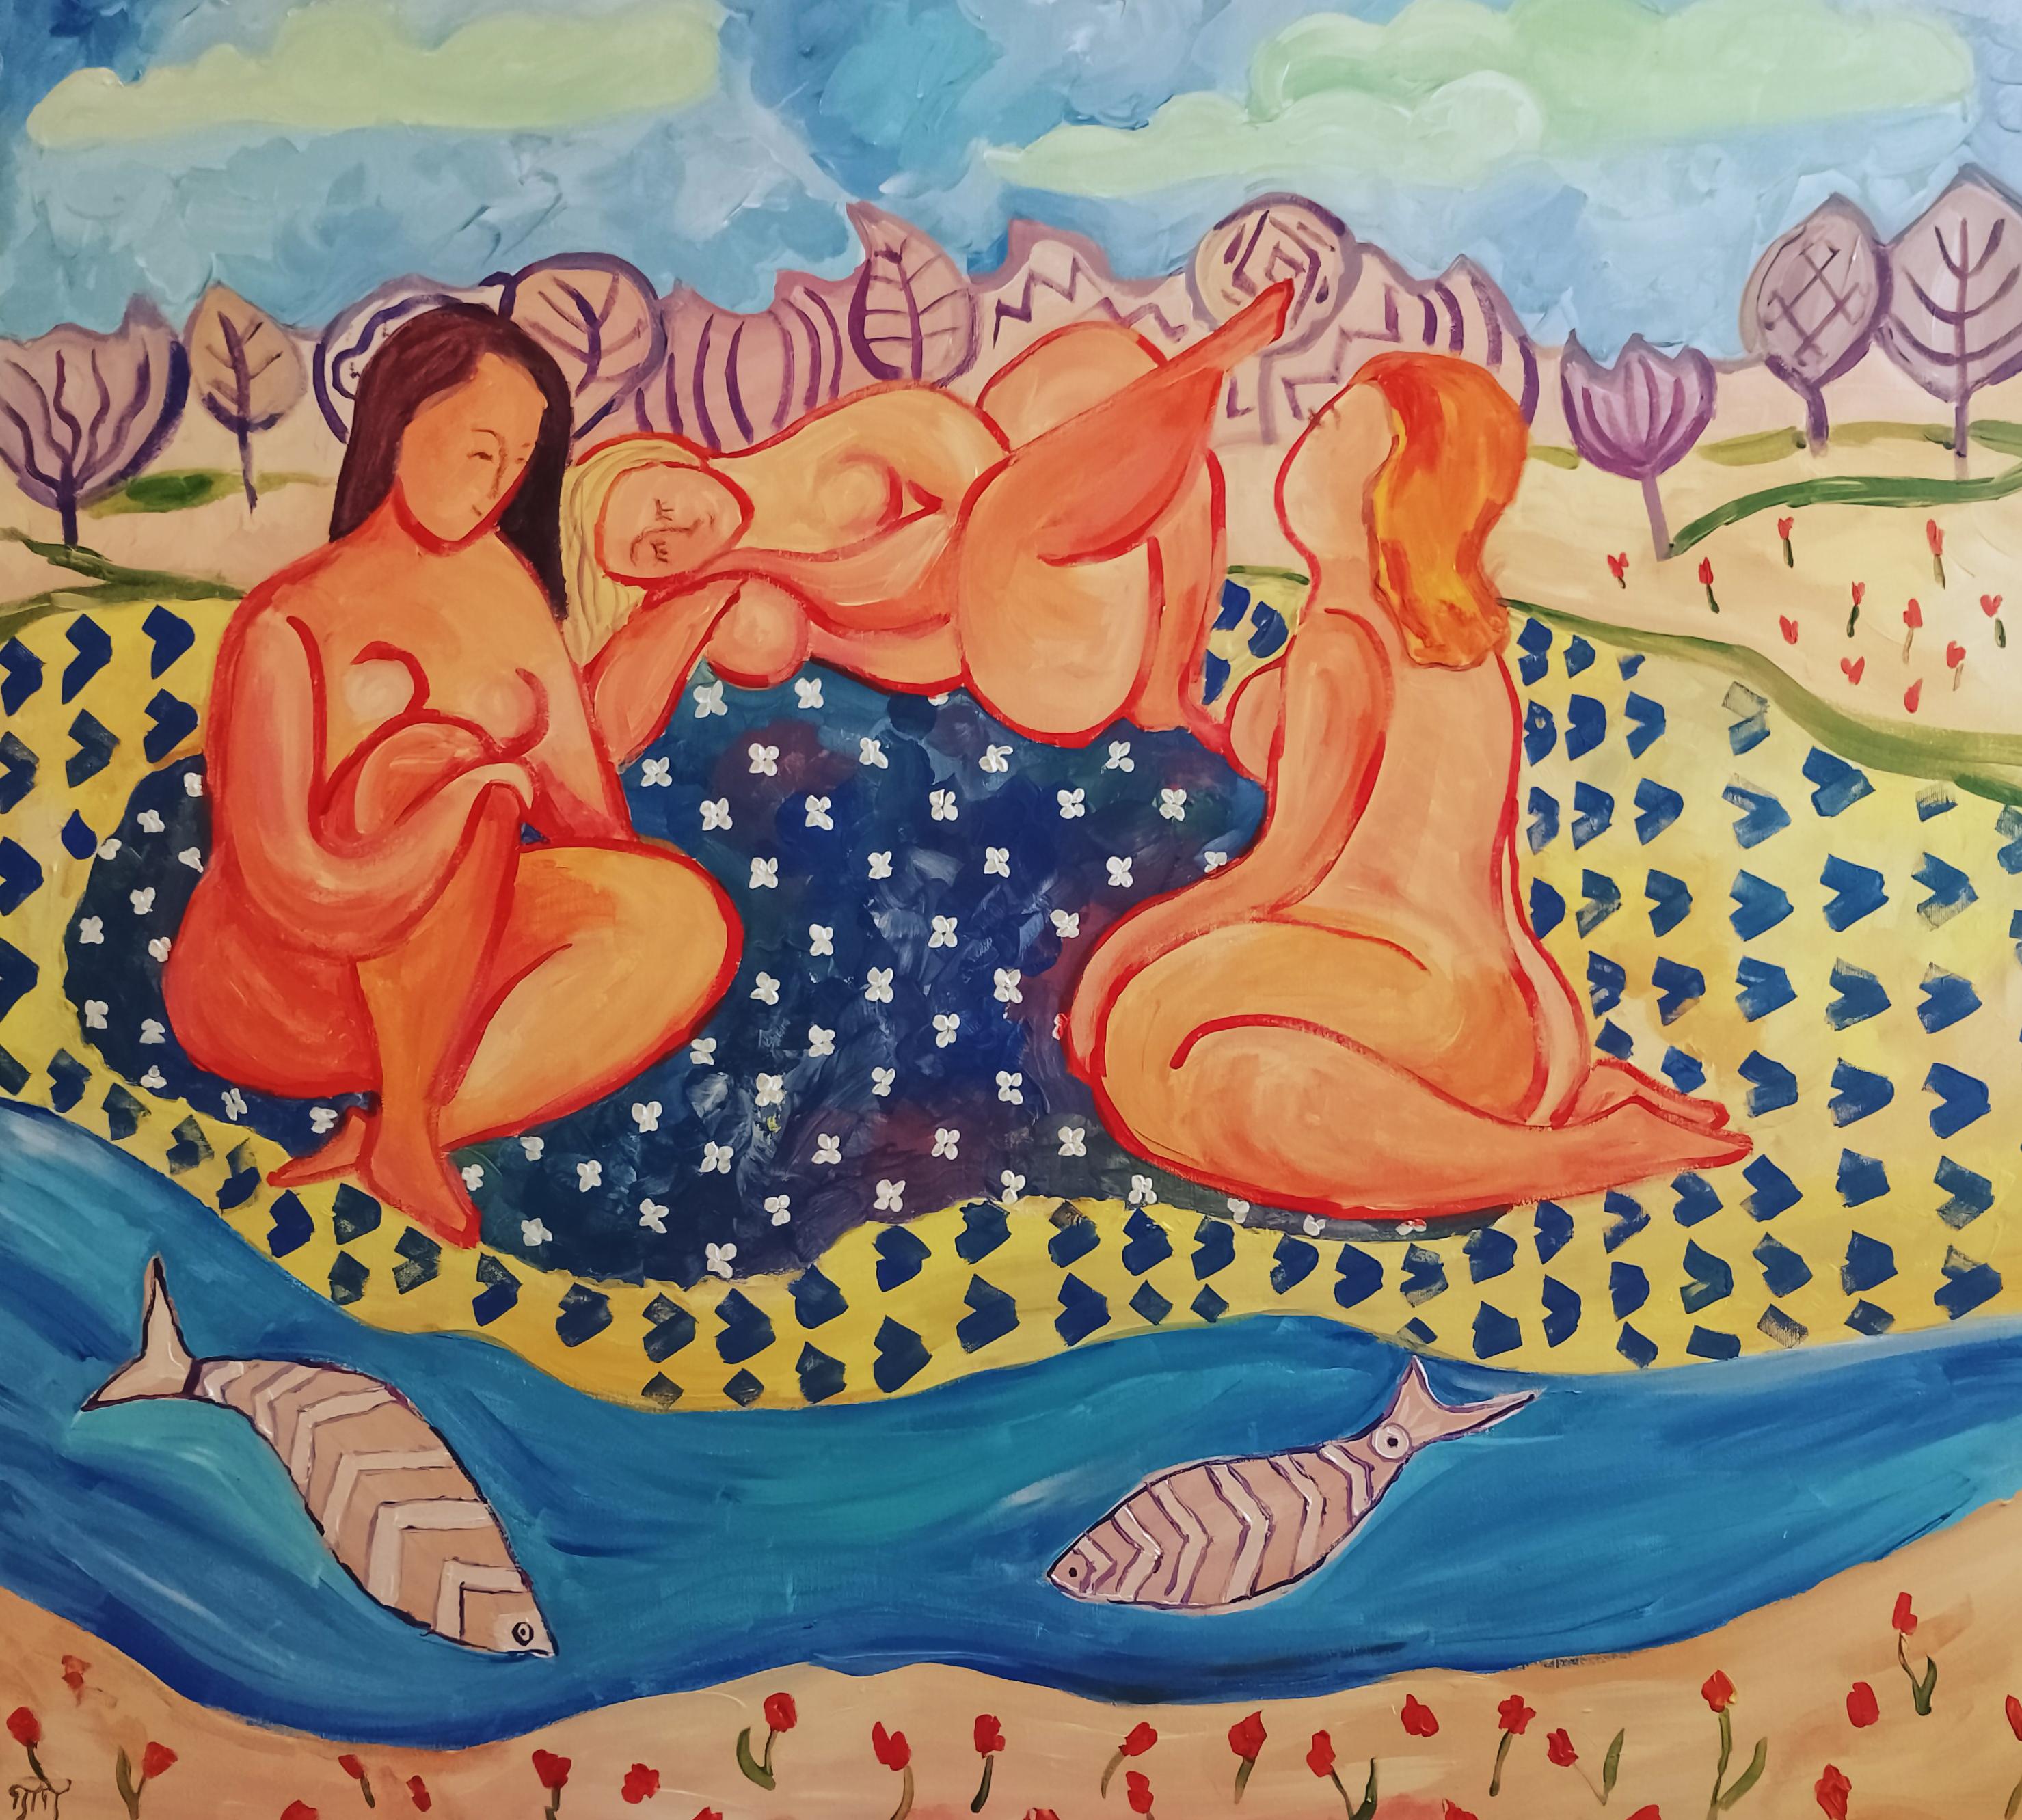 "Contemplations by the River," part of my evocative "Thoughts" series, is a journey into the serene embrace of nature and the introspective spirit of femininity. This painting resonates with the raw energy of primitivism and the vividness of color,